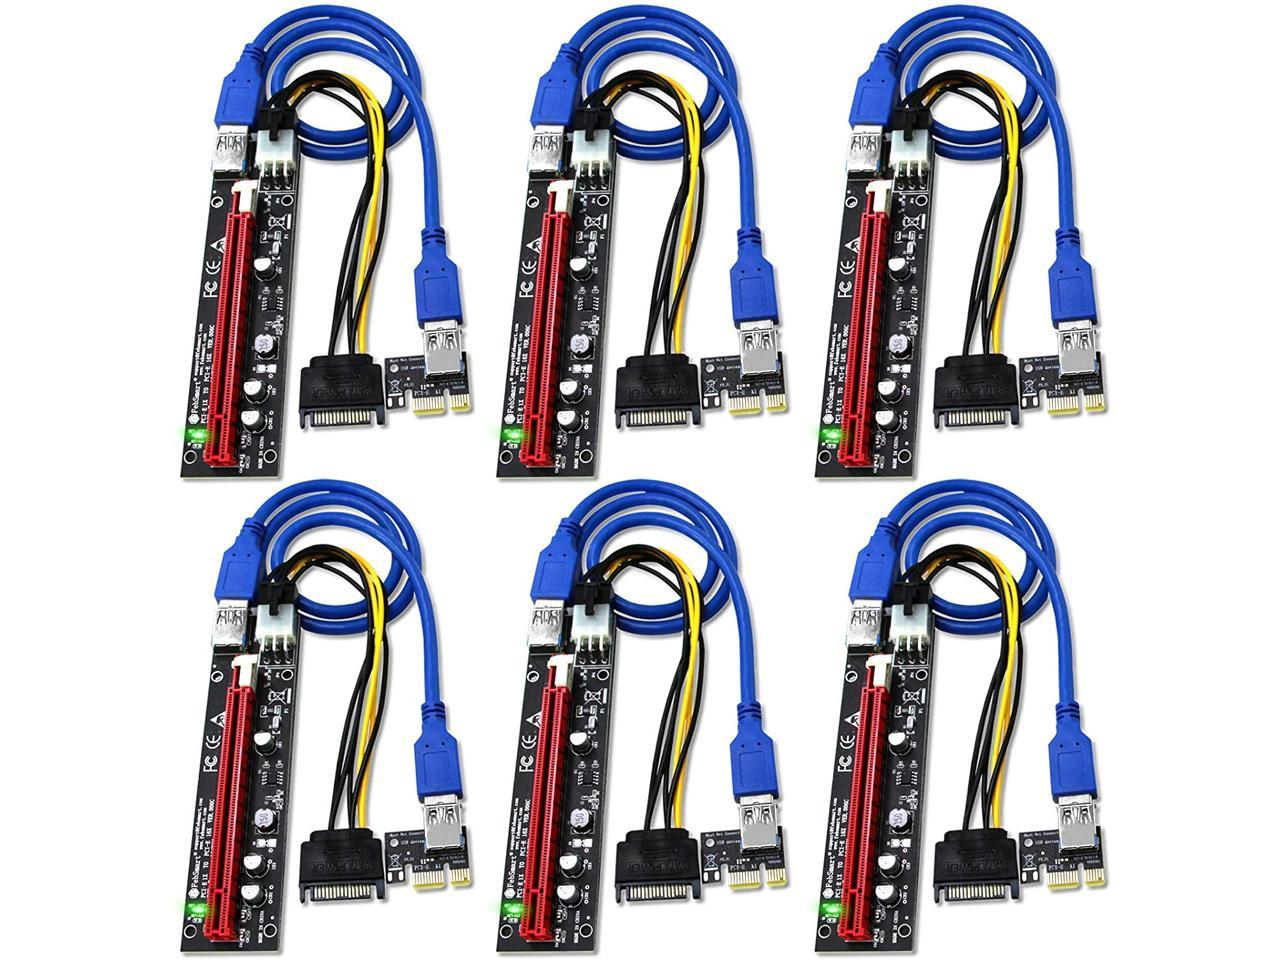 6 Pack PCI-E Riser GPU Risers Card 10 Capacitors,16x to 1x Pcie Express Powered Adapter Card for Bitcoin Litecoin ETH Coin Mining with RGB Colorful LED Light & 60cm USB 3.0 Extension Cable 